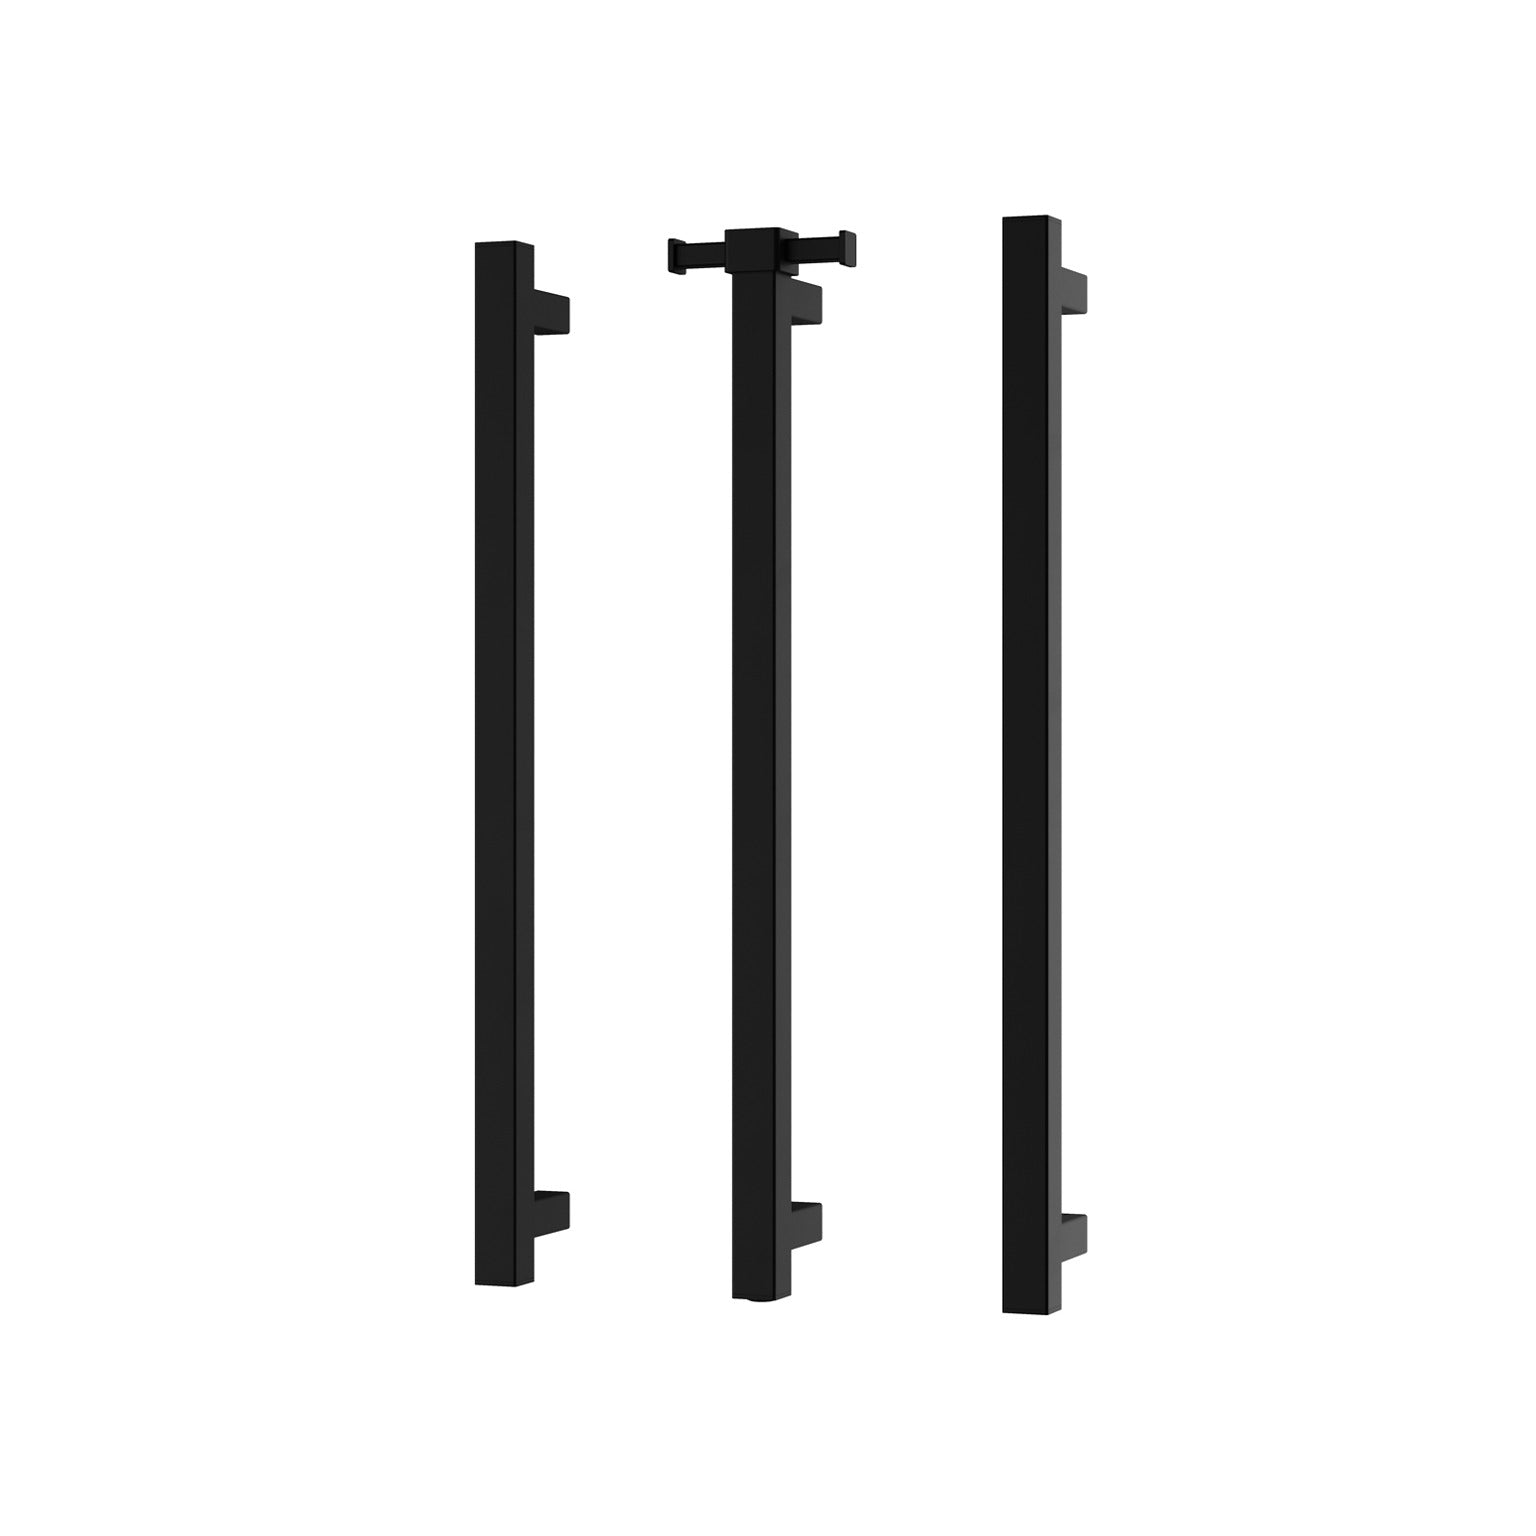 PHOENIX SQUARE TRIPLE HEATED TOWEL RAIL MATTE BLACK (AVAILABLE IN 600MM AND 800MM)